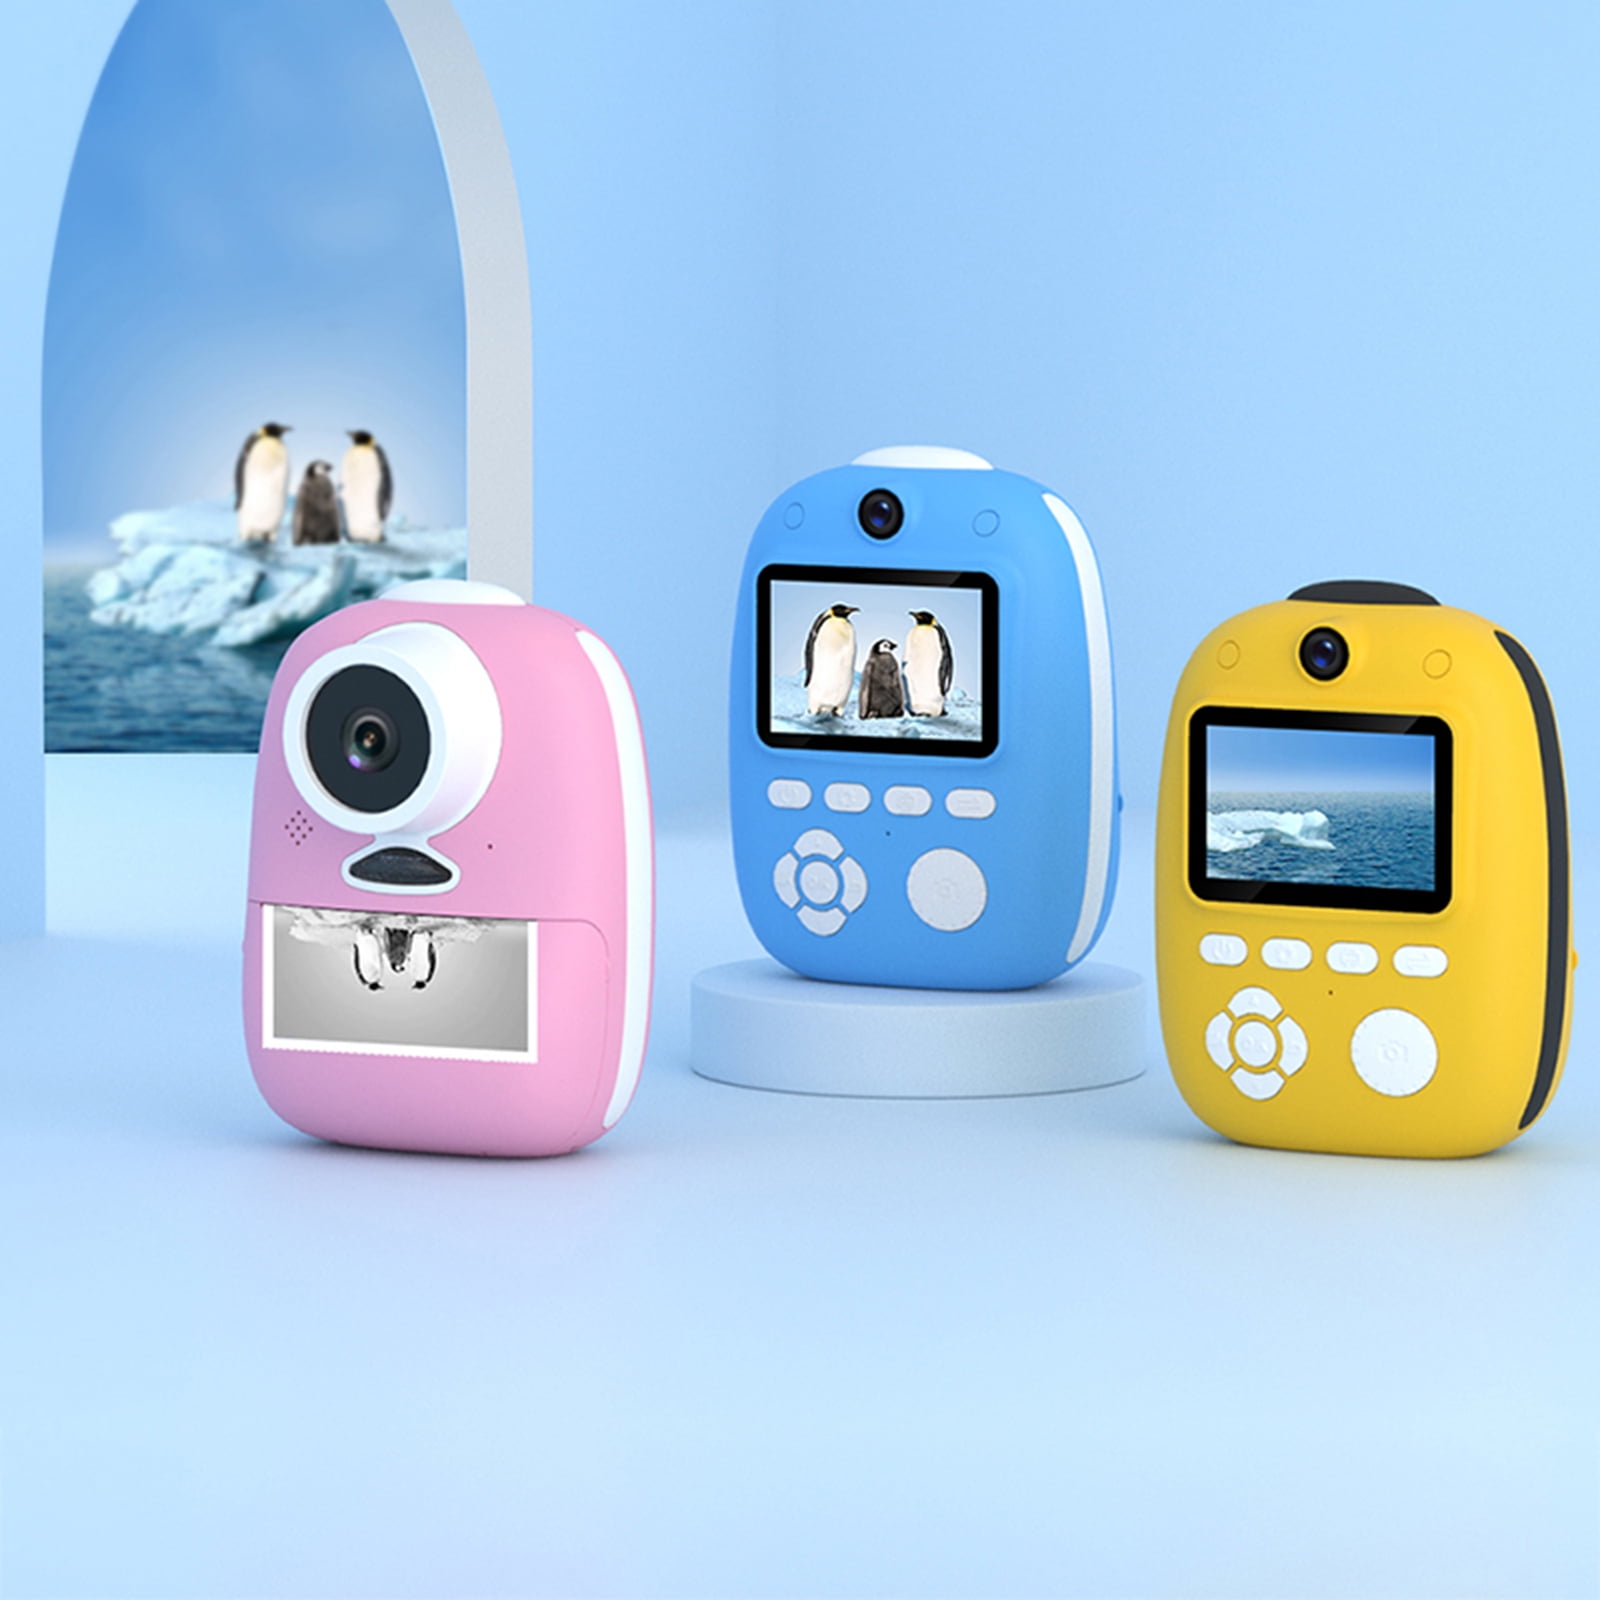 Portable Photo Printer for Girls Boys Travel Pink Double Lens Toys Instant Print Camera Support Selfies Video with Wider Strap Cartoon Bag 4 Photo Paper Abdtech Instant Digital Camera for Kids 